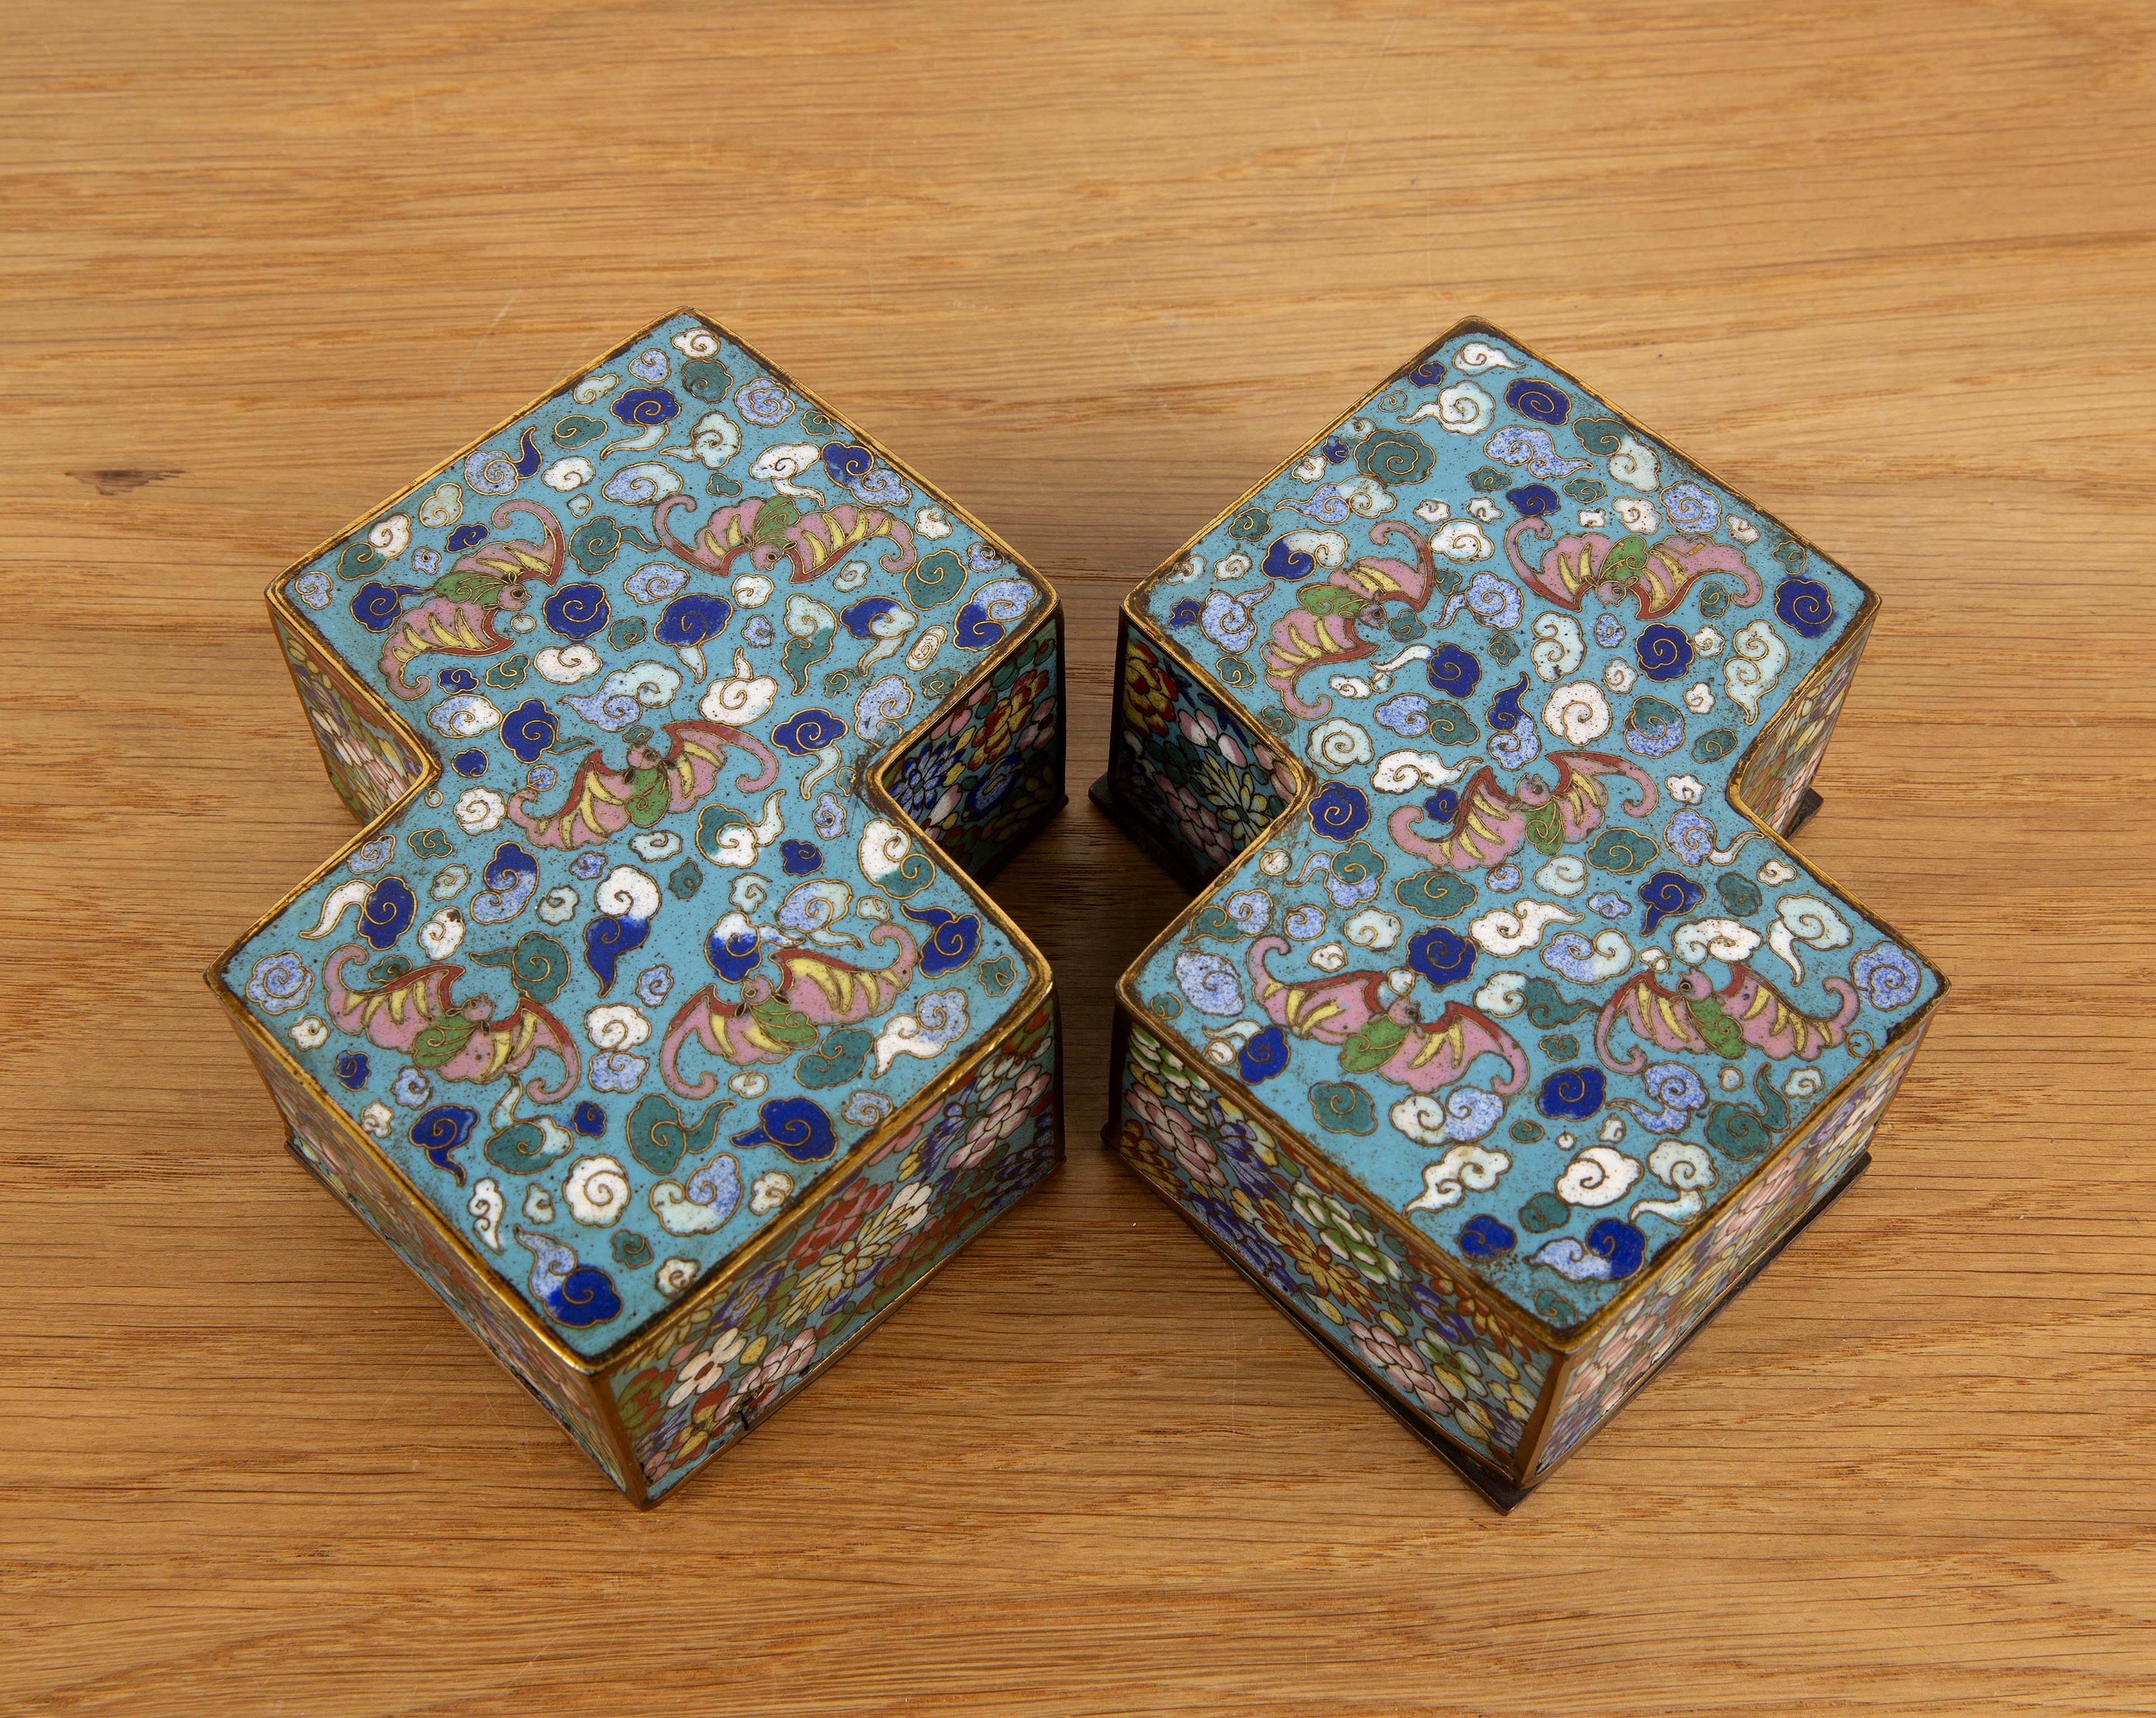 Pair of shaped blue ground cloisonne boxes Chinese, 19th Century each with bat and butterfly - Image 4 of 7